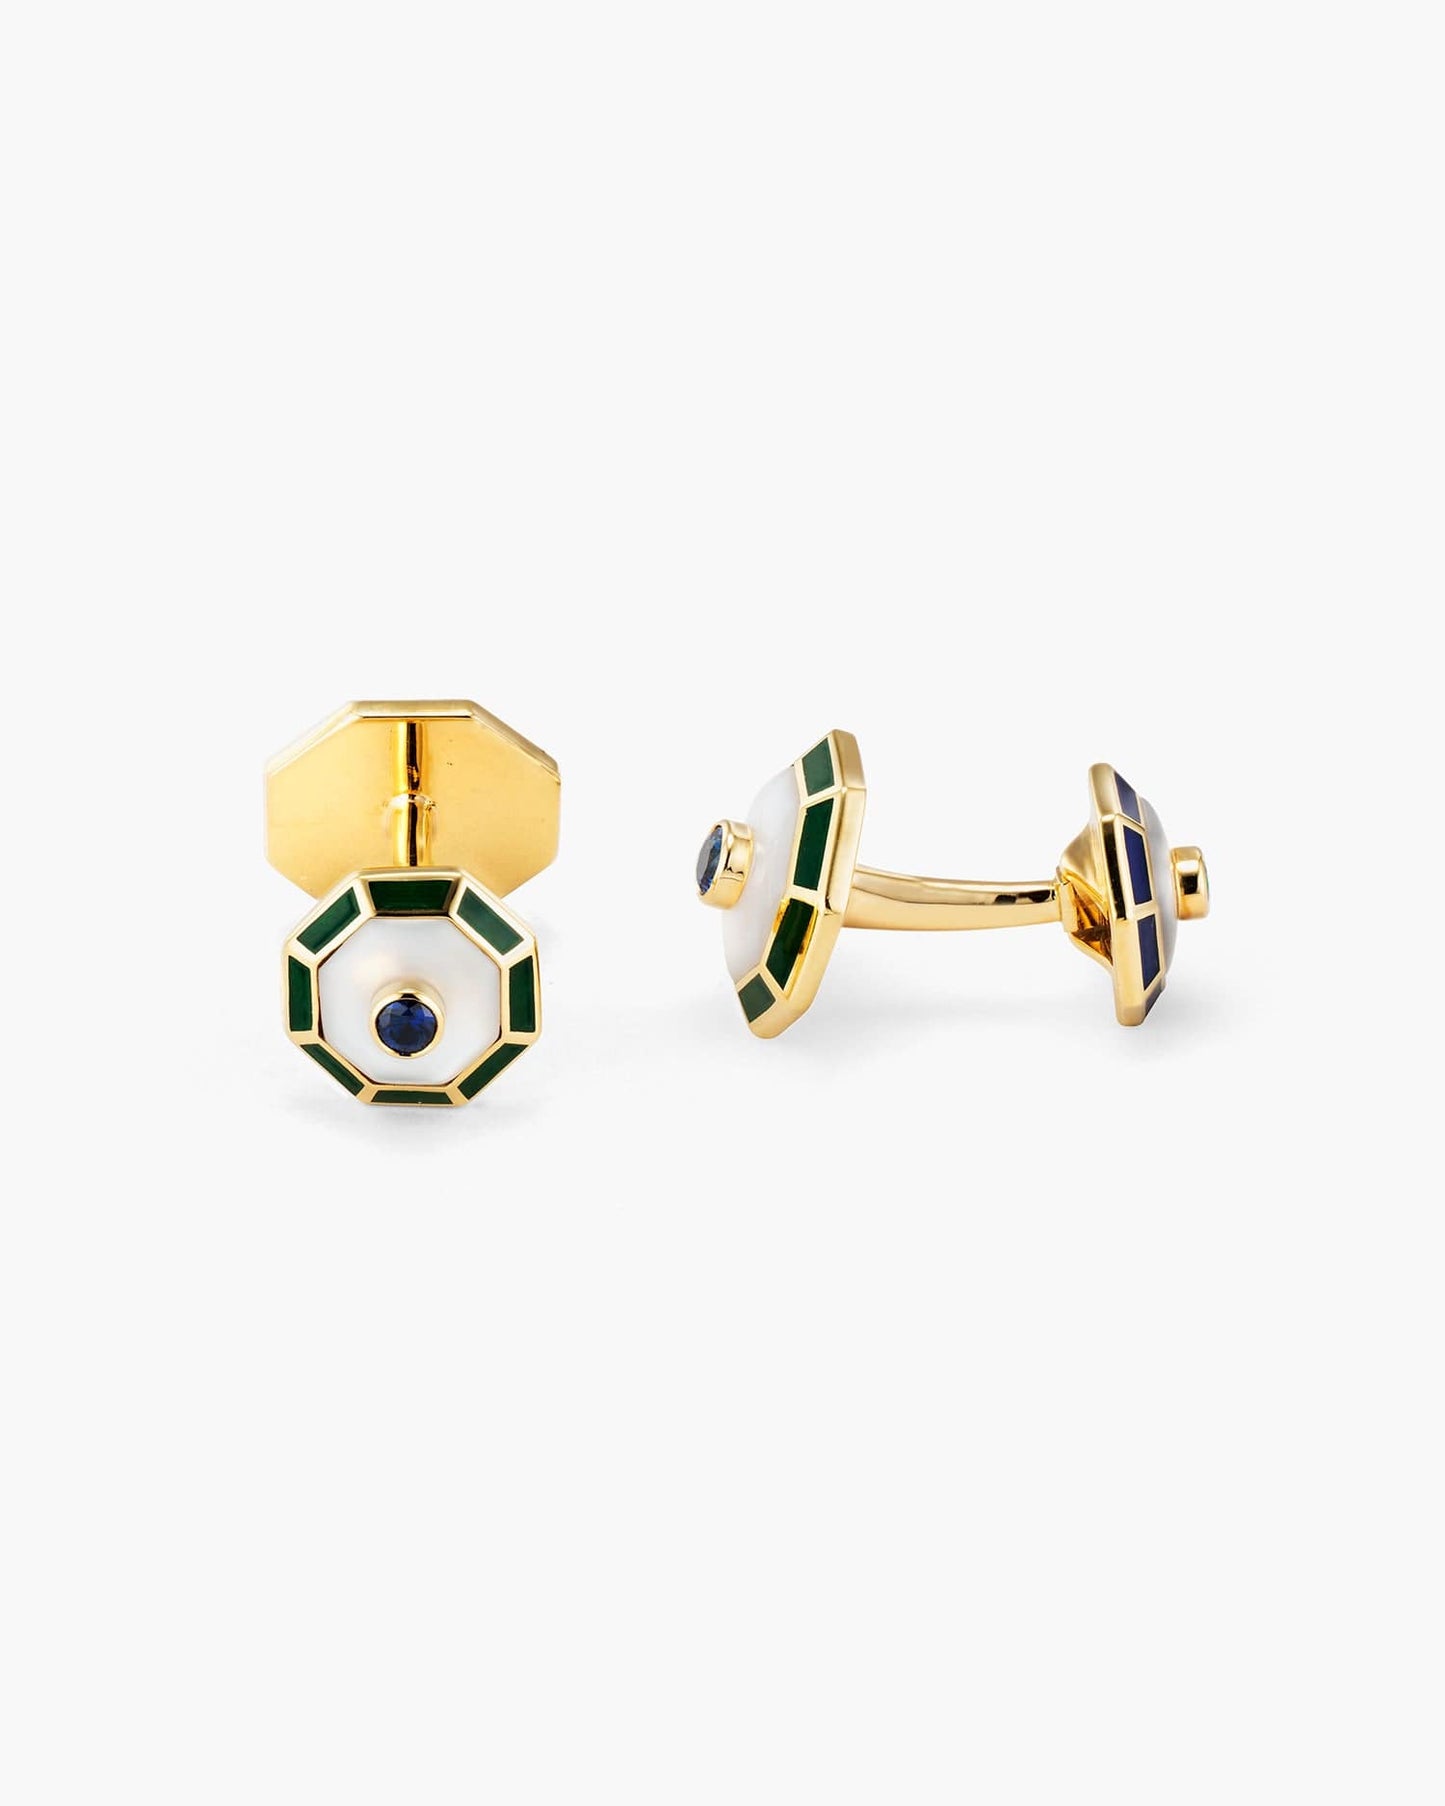 Emerald, Sapphire, Mother of Pearl and Enamel Octagonal Cufflinks